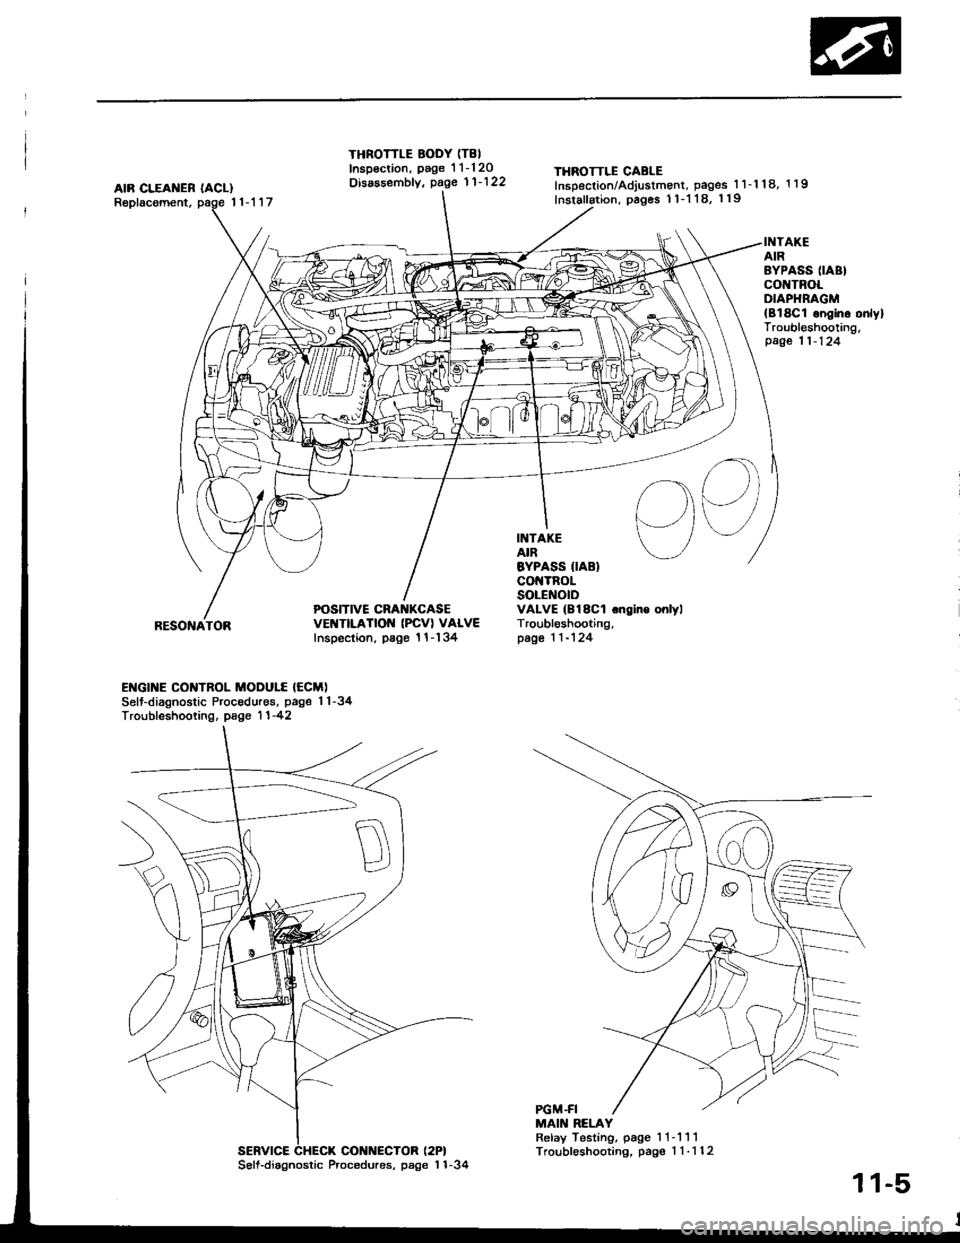 HONDA INTEGRA 1994 4.G Workshop Manual AIR CLEAI{ER IACL)Replacoment,11-117
THROTTLE BODY (T8I
Inspsction, page 1 1-120Disassembfy, page 11122THROTTLE CABLEInsDection/Adjustment, pages 1 l-l 18, 1 19
Inslallation, pages 1 1-1 18, 119
POS